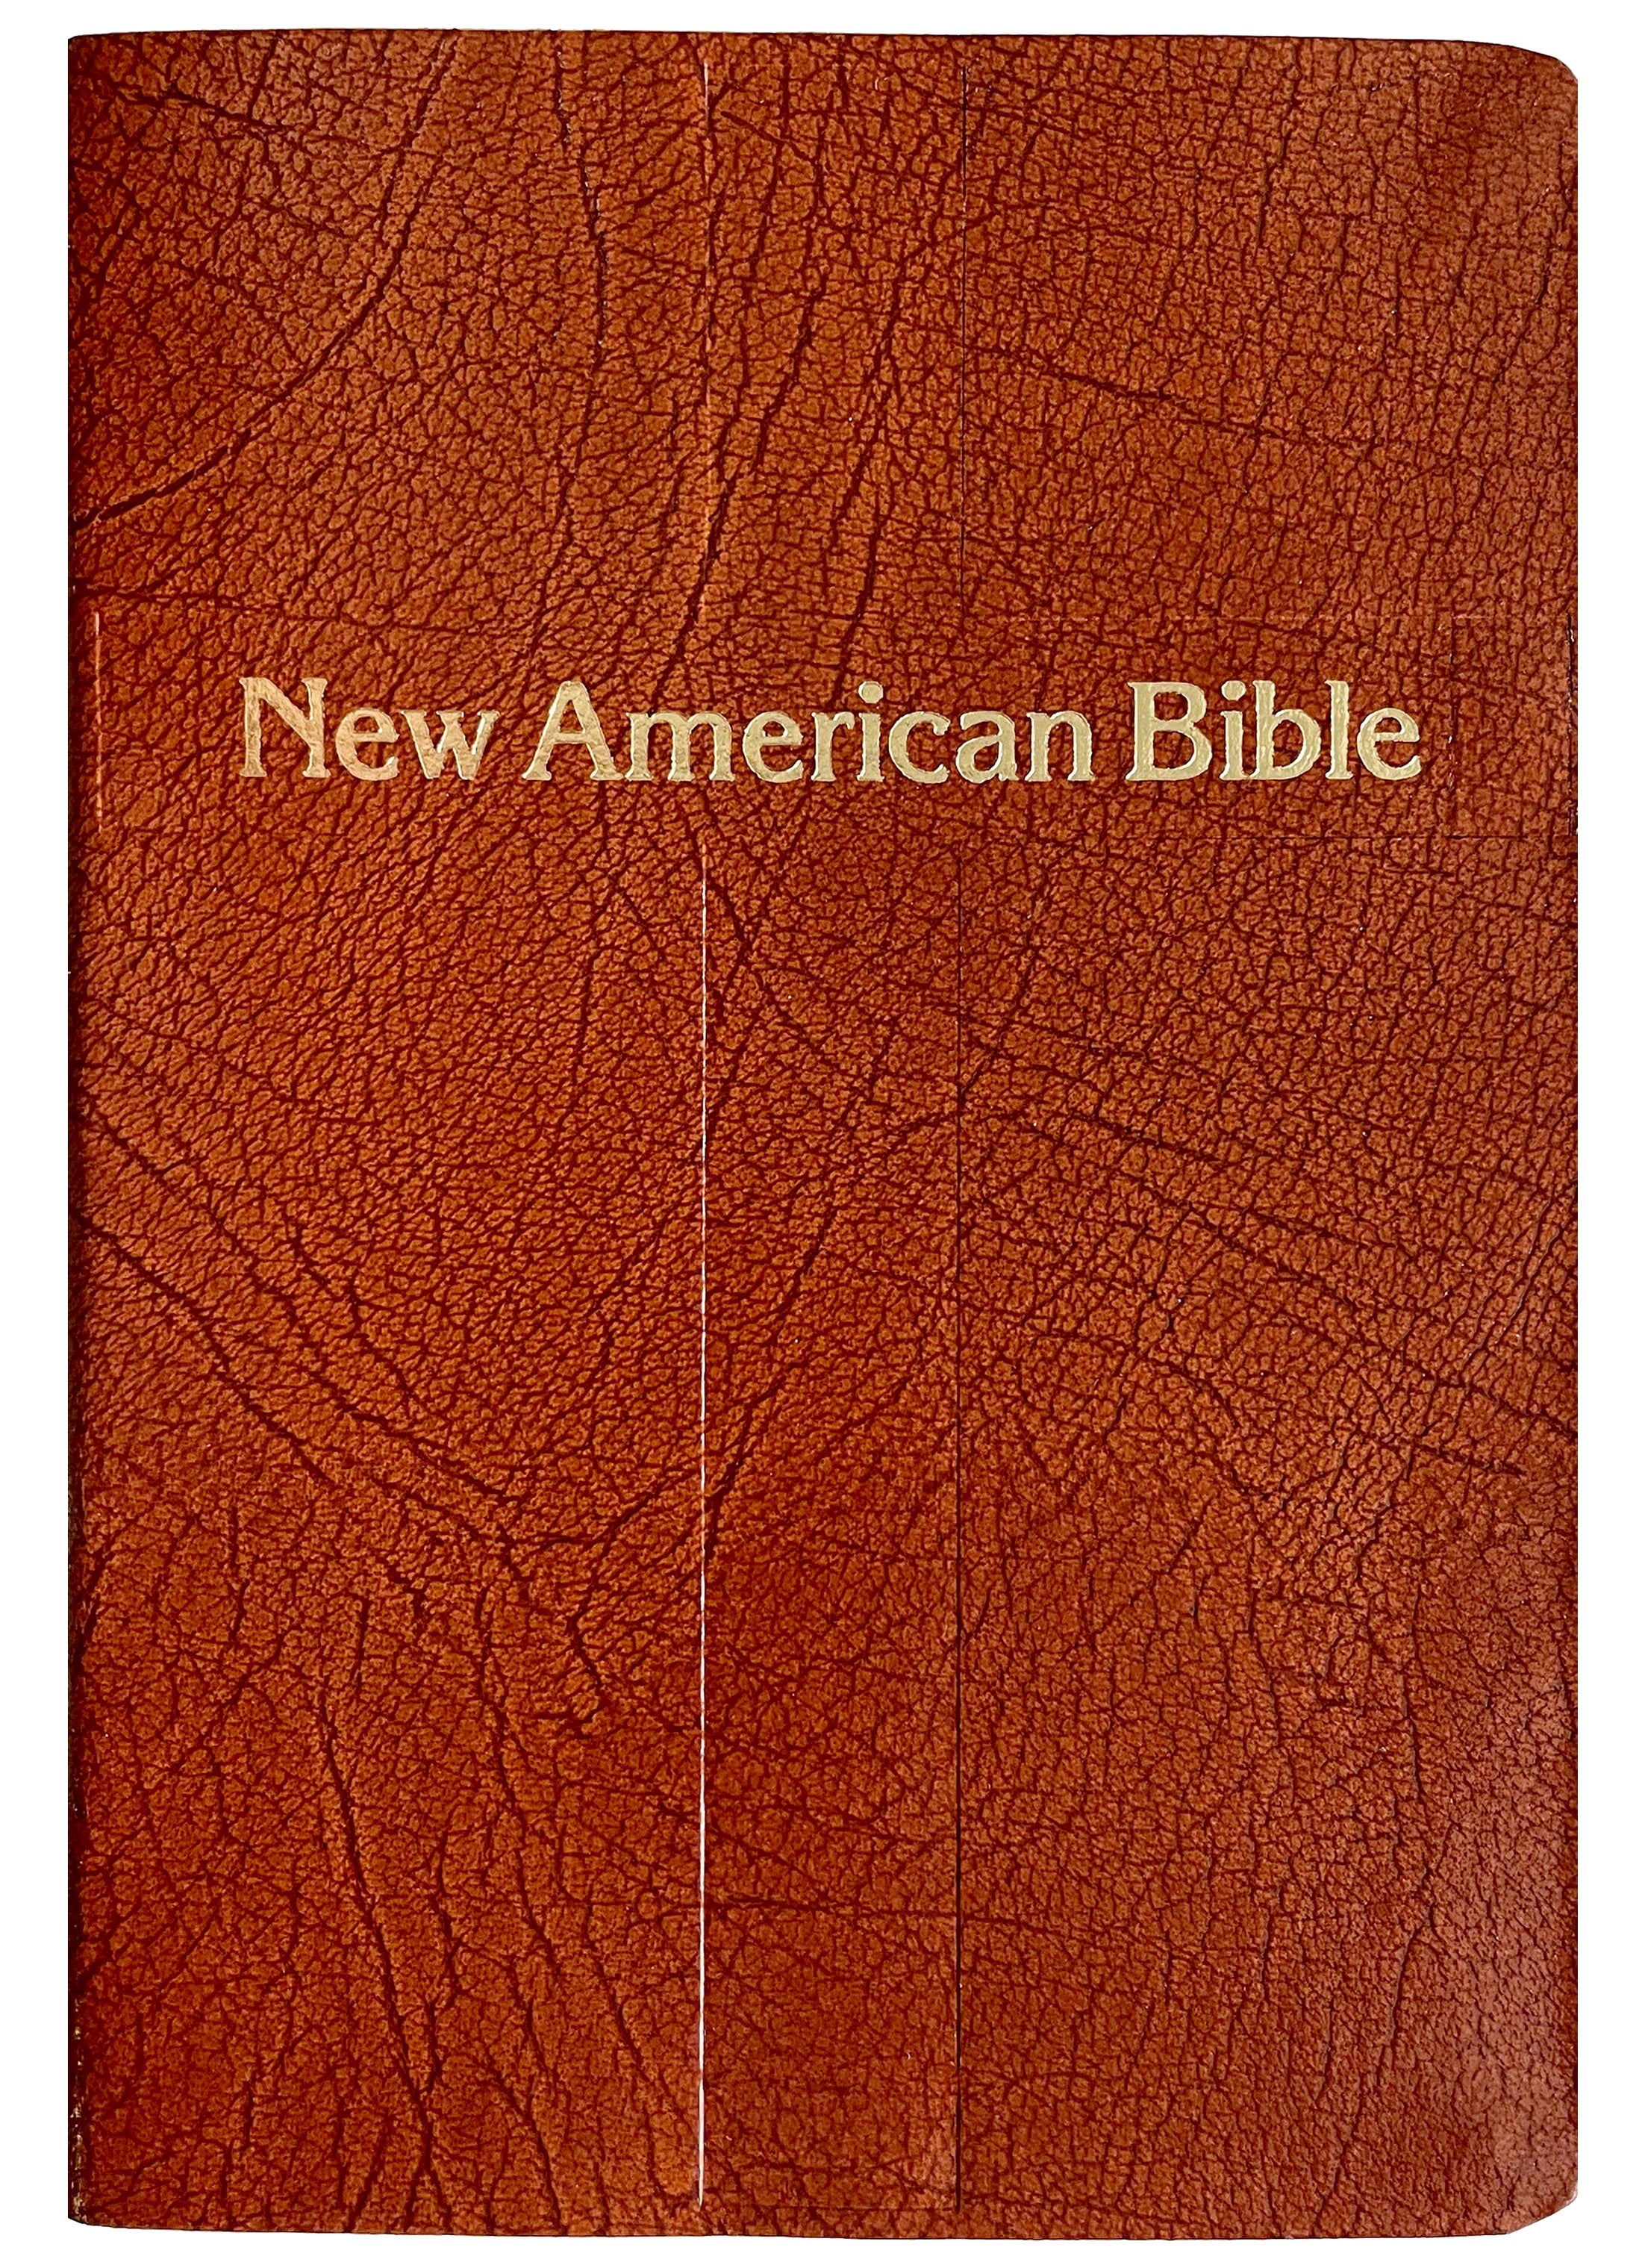 New American Bible - Gift Boxed